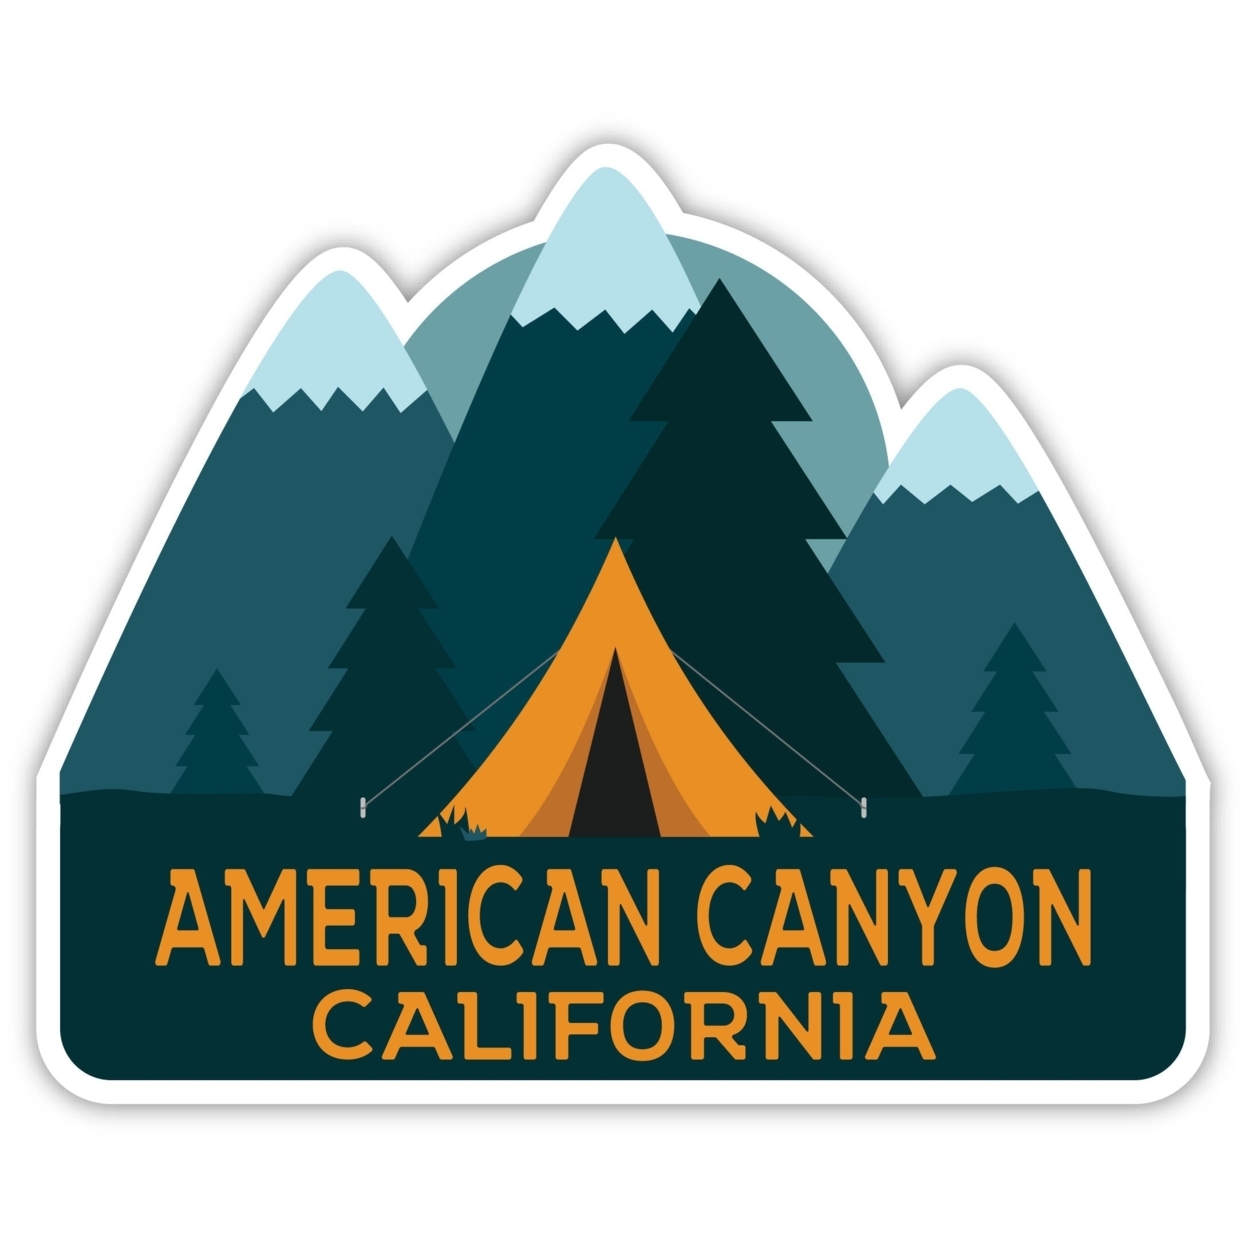 American Canyon California Souvenir Decorative Stickers (Choose Theme And Size) - 4-Pack, 4-Inch, Tent